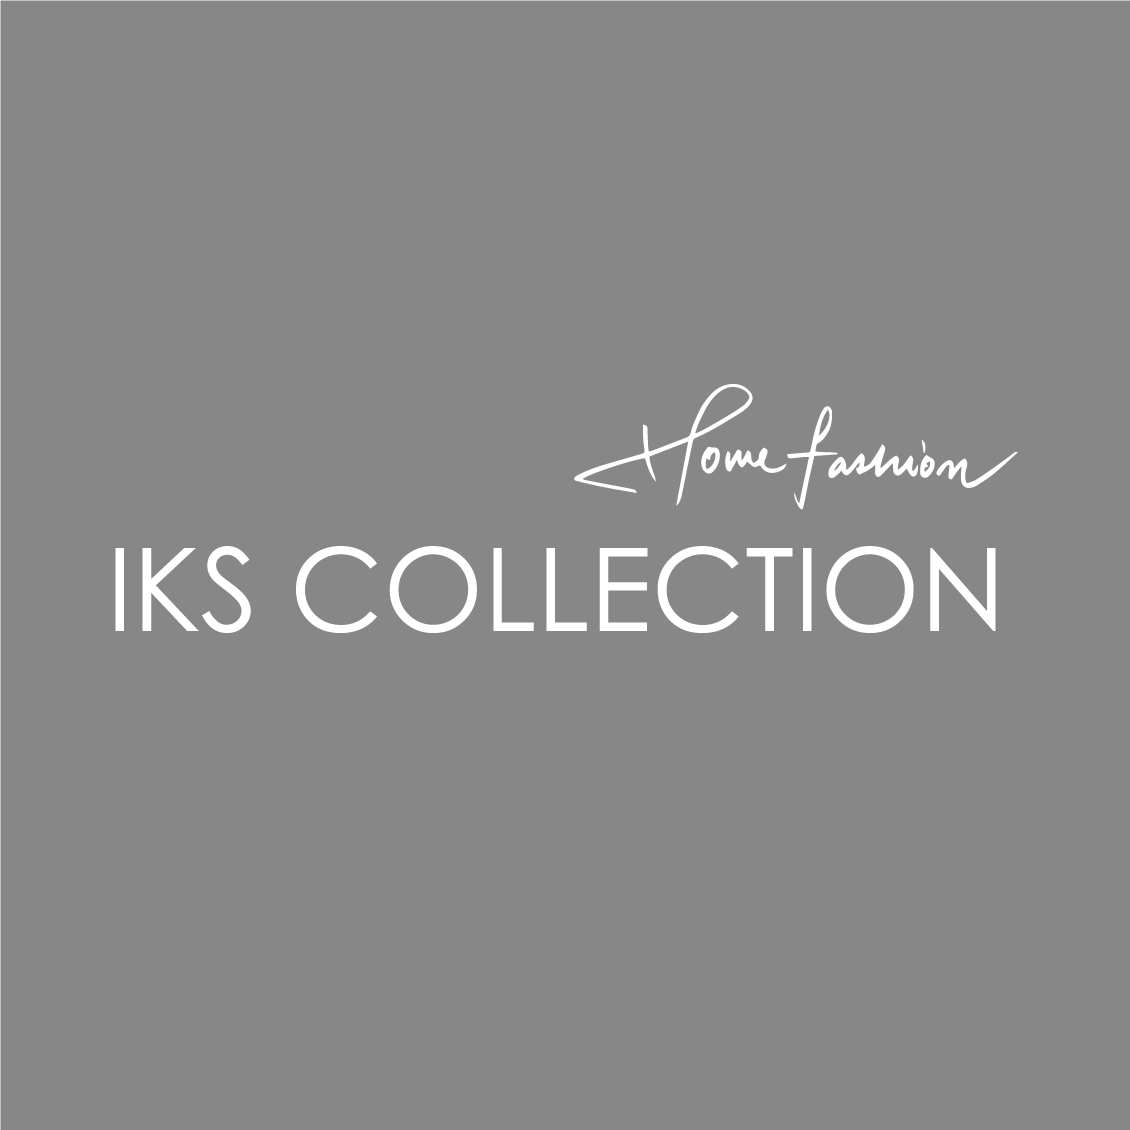 IKS COLLECTION